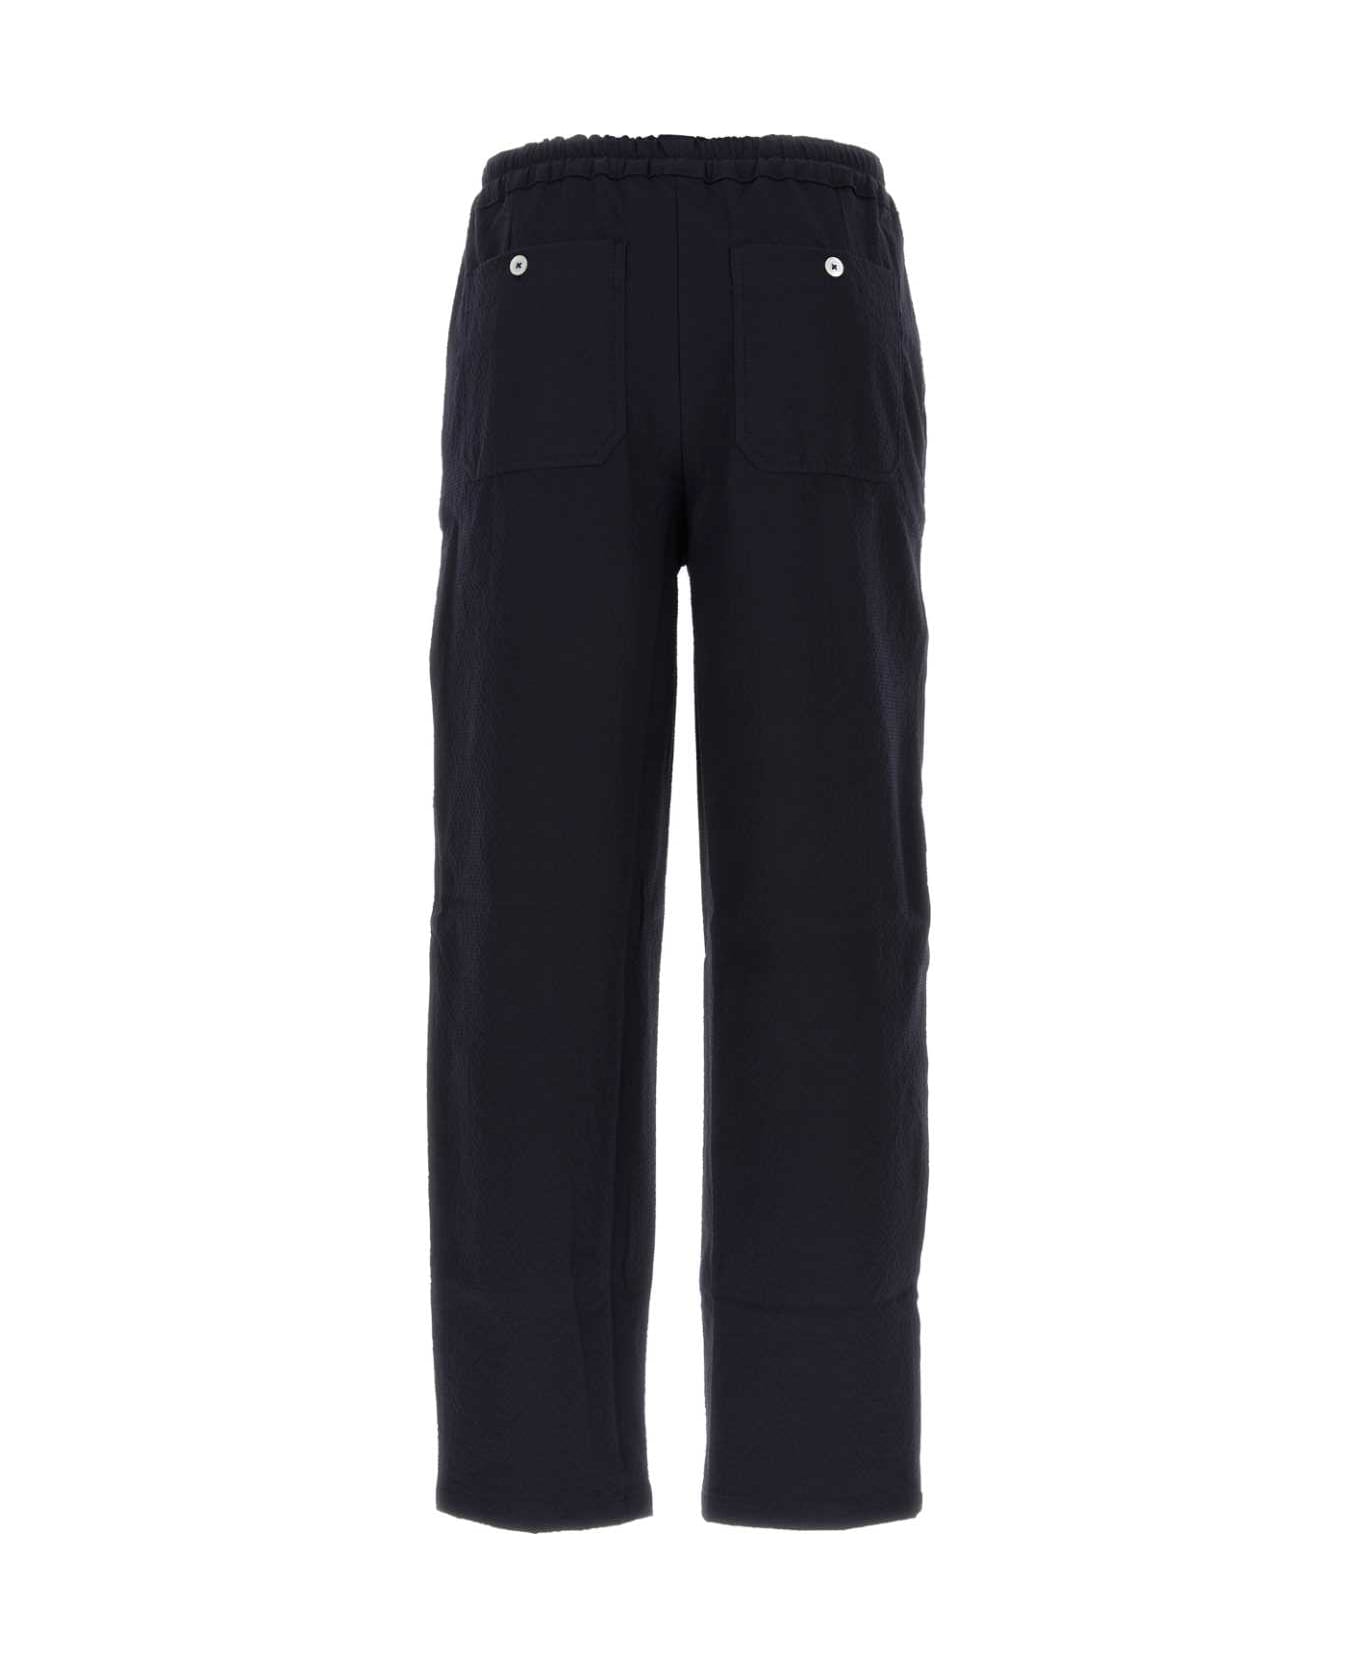 Howlin Navy Blue Stretch Cotton Tropical Pant - NAVY  ボトムス